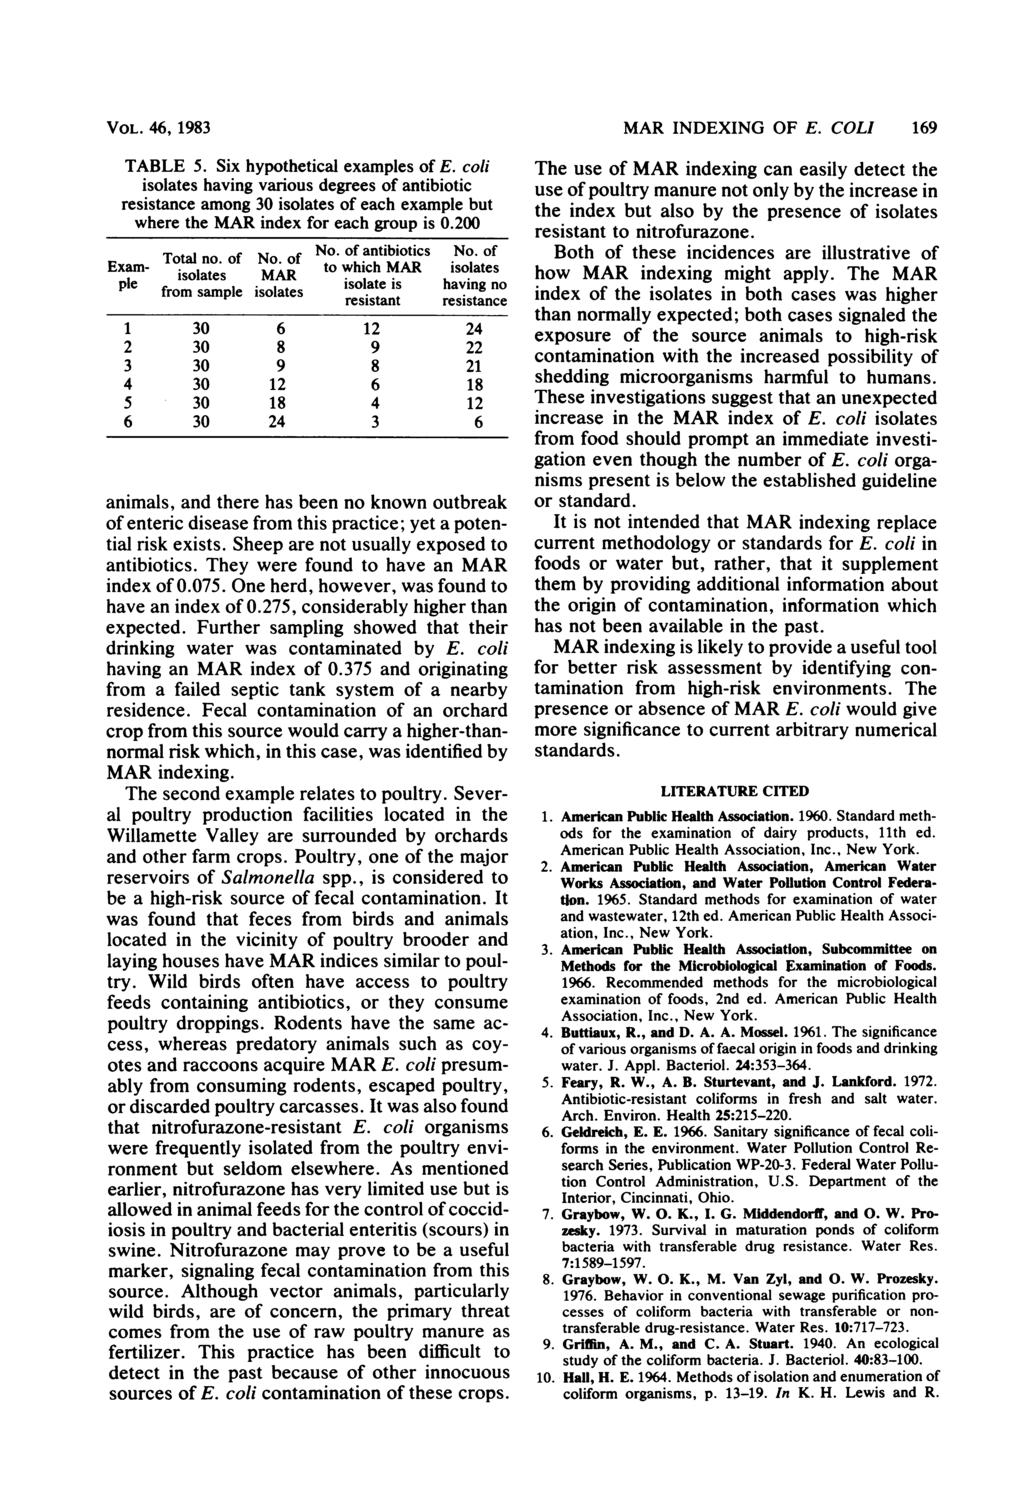 VOL. 46, 1983 TABLE 5. Six hypothetical examples of E. coli isolates having various degrees of antibiotic resistance among 30 isolates of each example but where the MAR index for each group is 0.